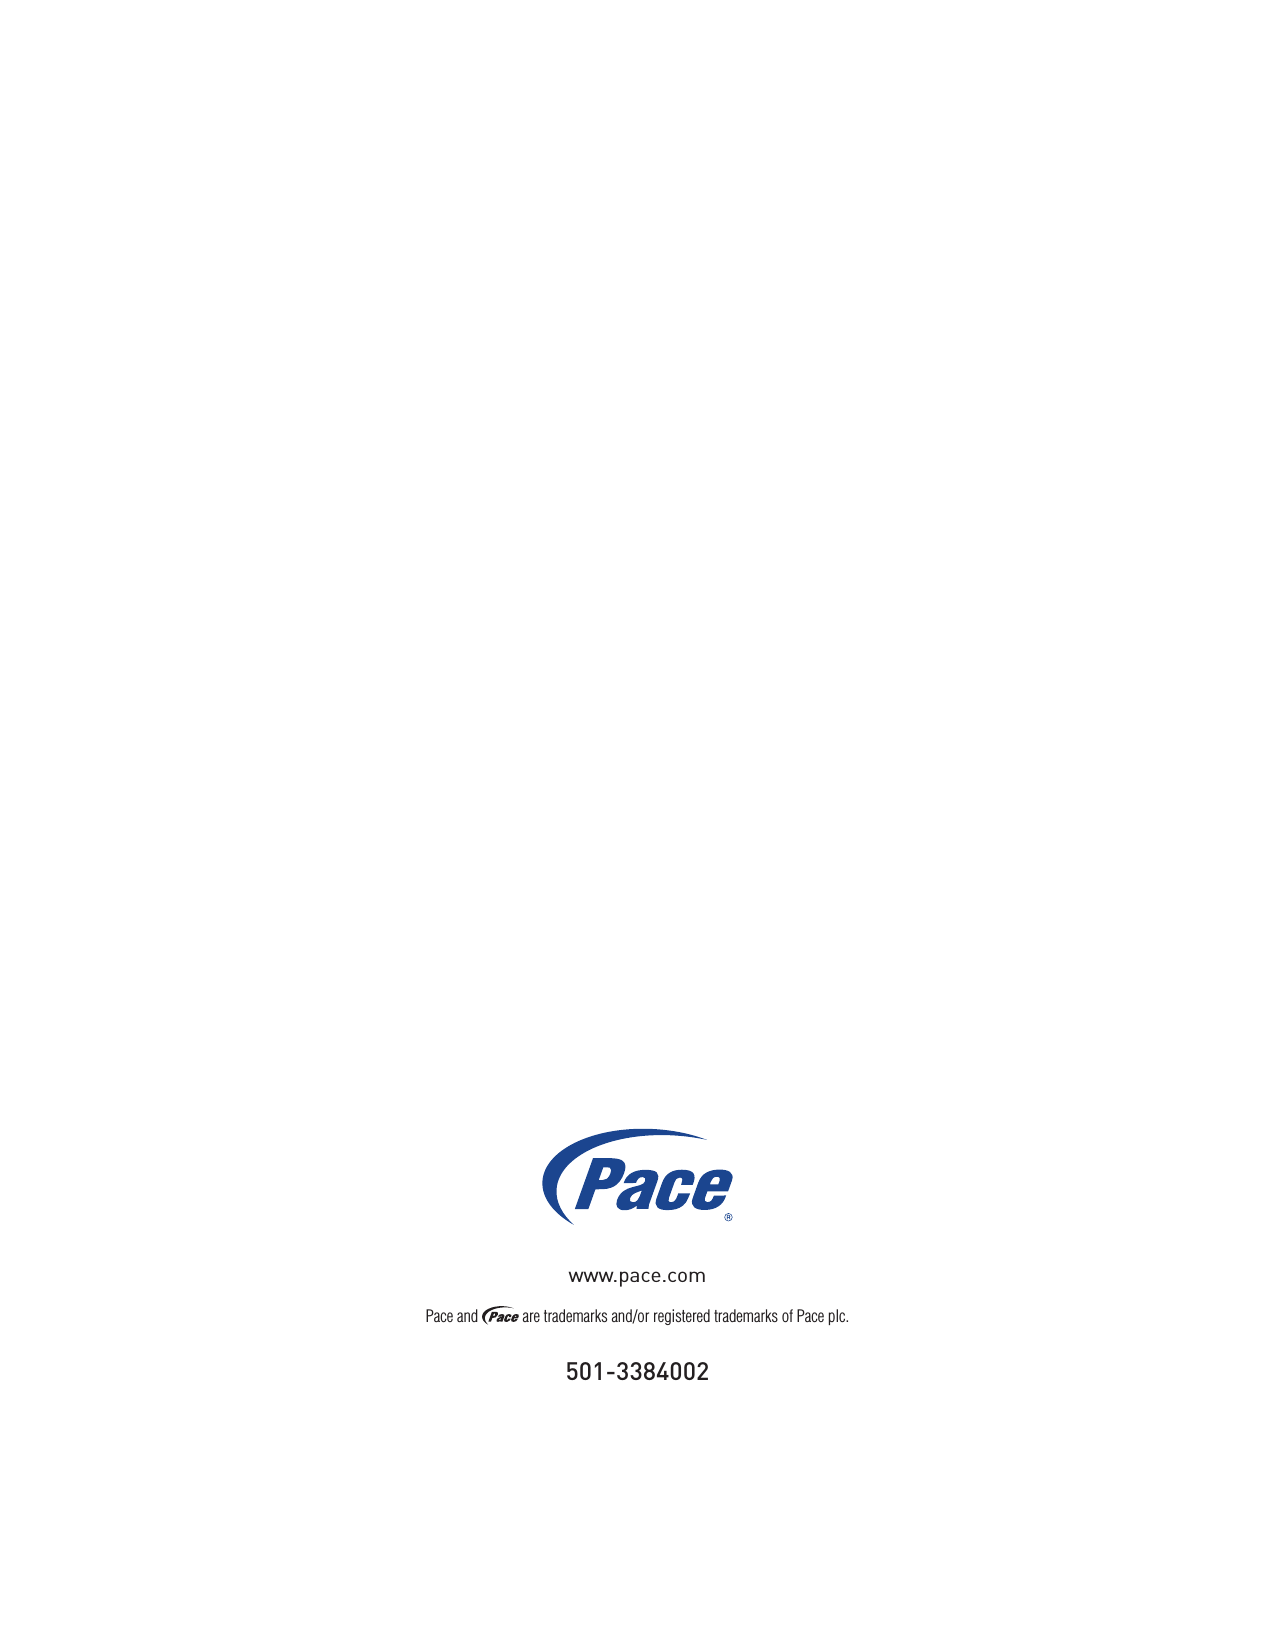 501-3384002Pace and   are trademarks and/or registered trademarks of Pace plc.www.pace.com